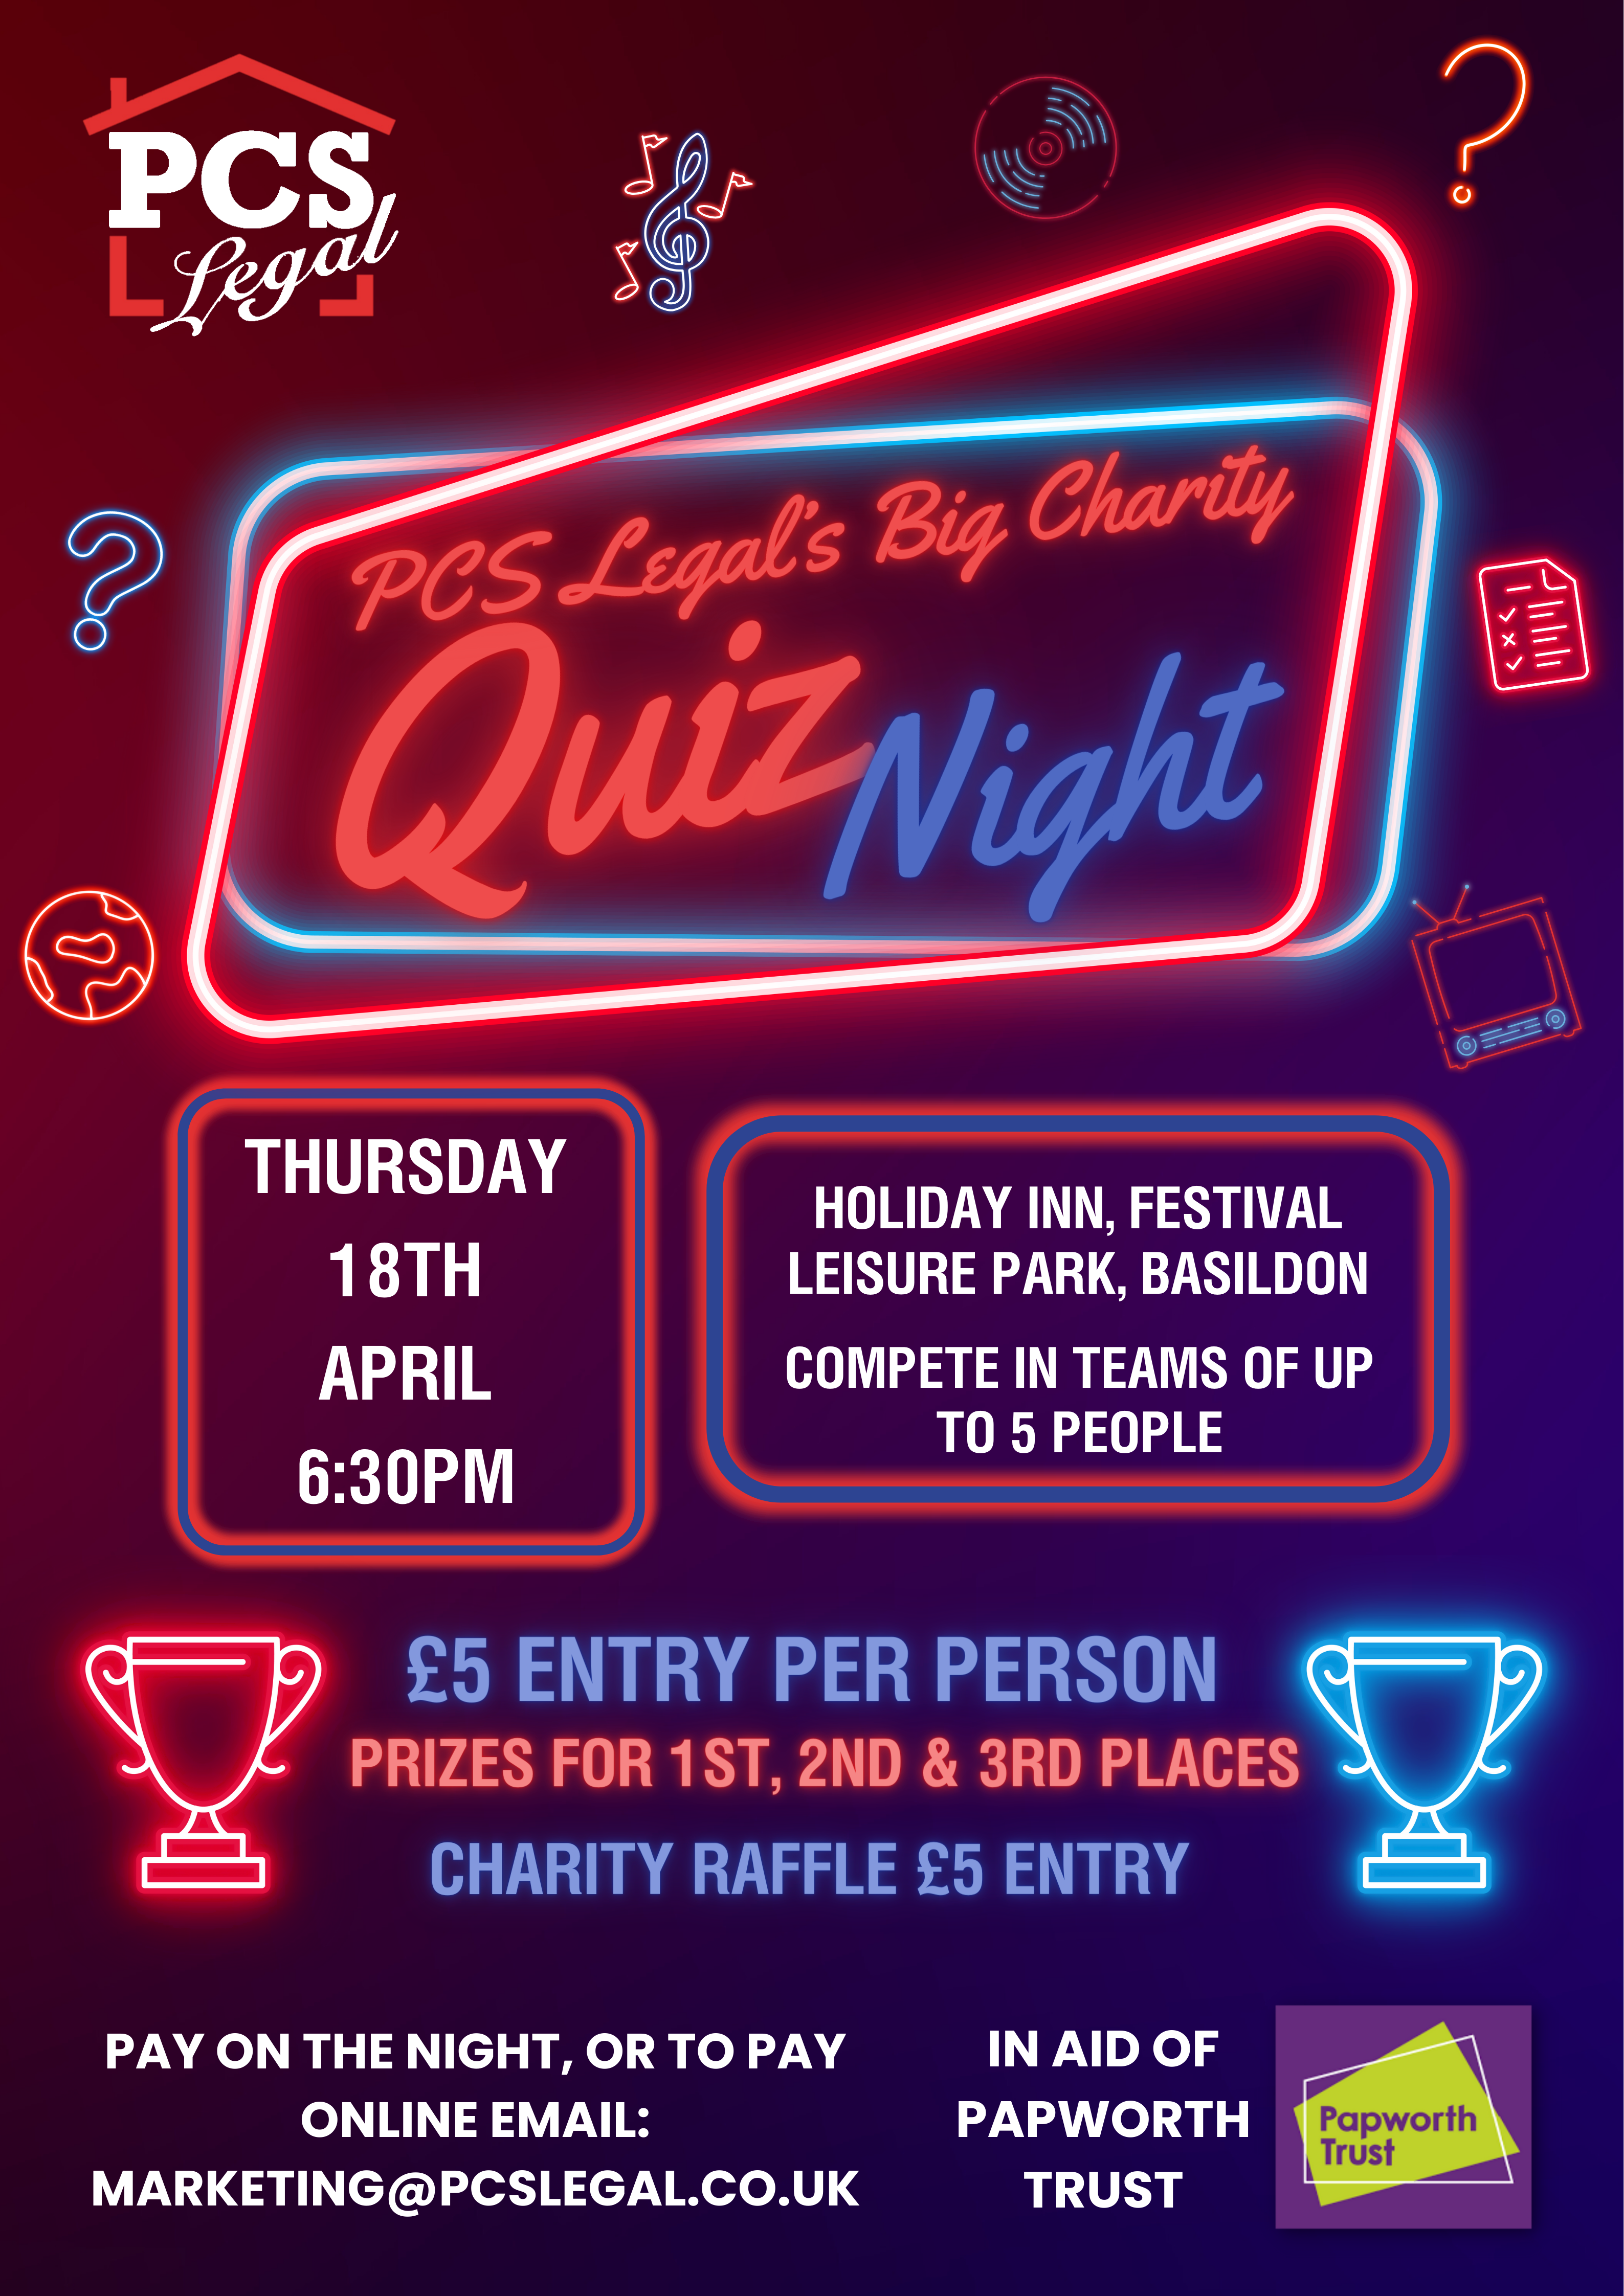 PCS Legal's Big Charity Quiz Night Thursday 18 April 6:30pm. Holiday Inn, Festival Leisure Park, Basildon. £5 Entry per person prizes for 1st, 2nd and 3rd places. Charity raffle £5 entry. Pay on the night, or to pay online email: marketing@pcslegal.co.uk. In aid of Papworth Trust